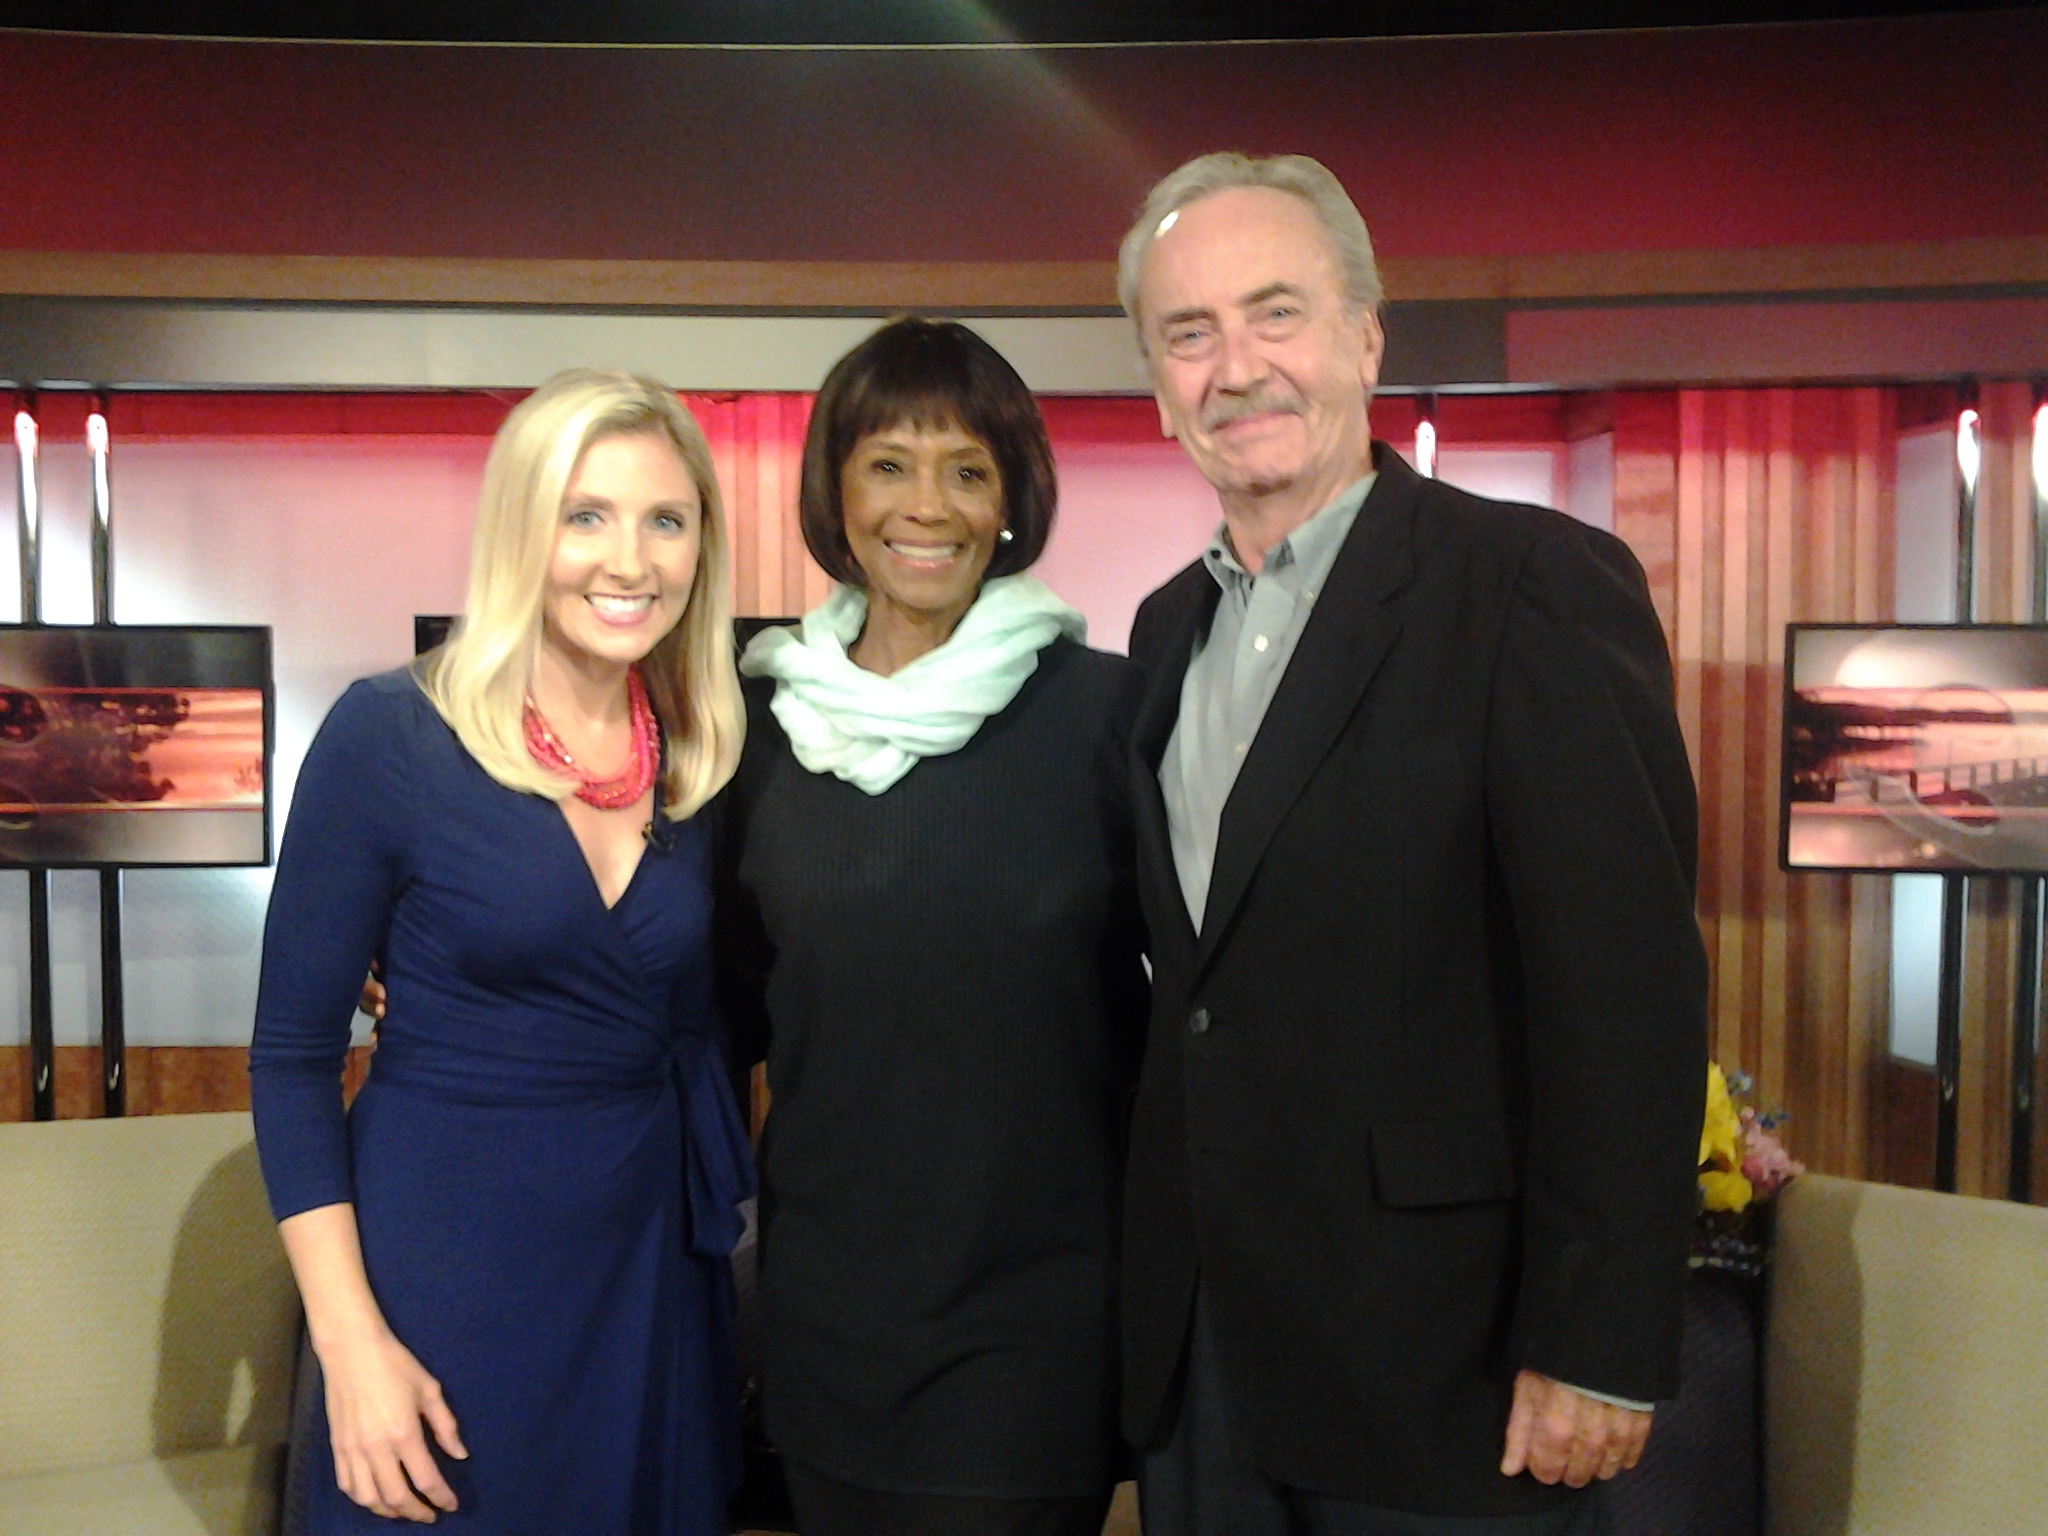  My co-star and I with the wonderful Carly Flynn Morgan of KTBS after our interview. She had such great spirit! 